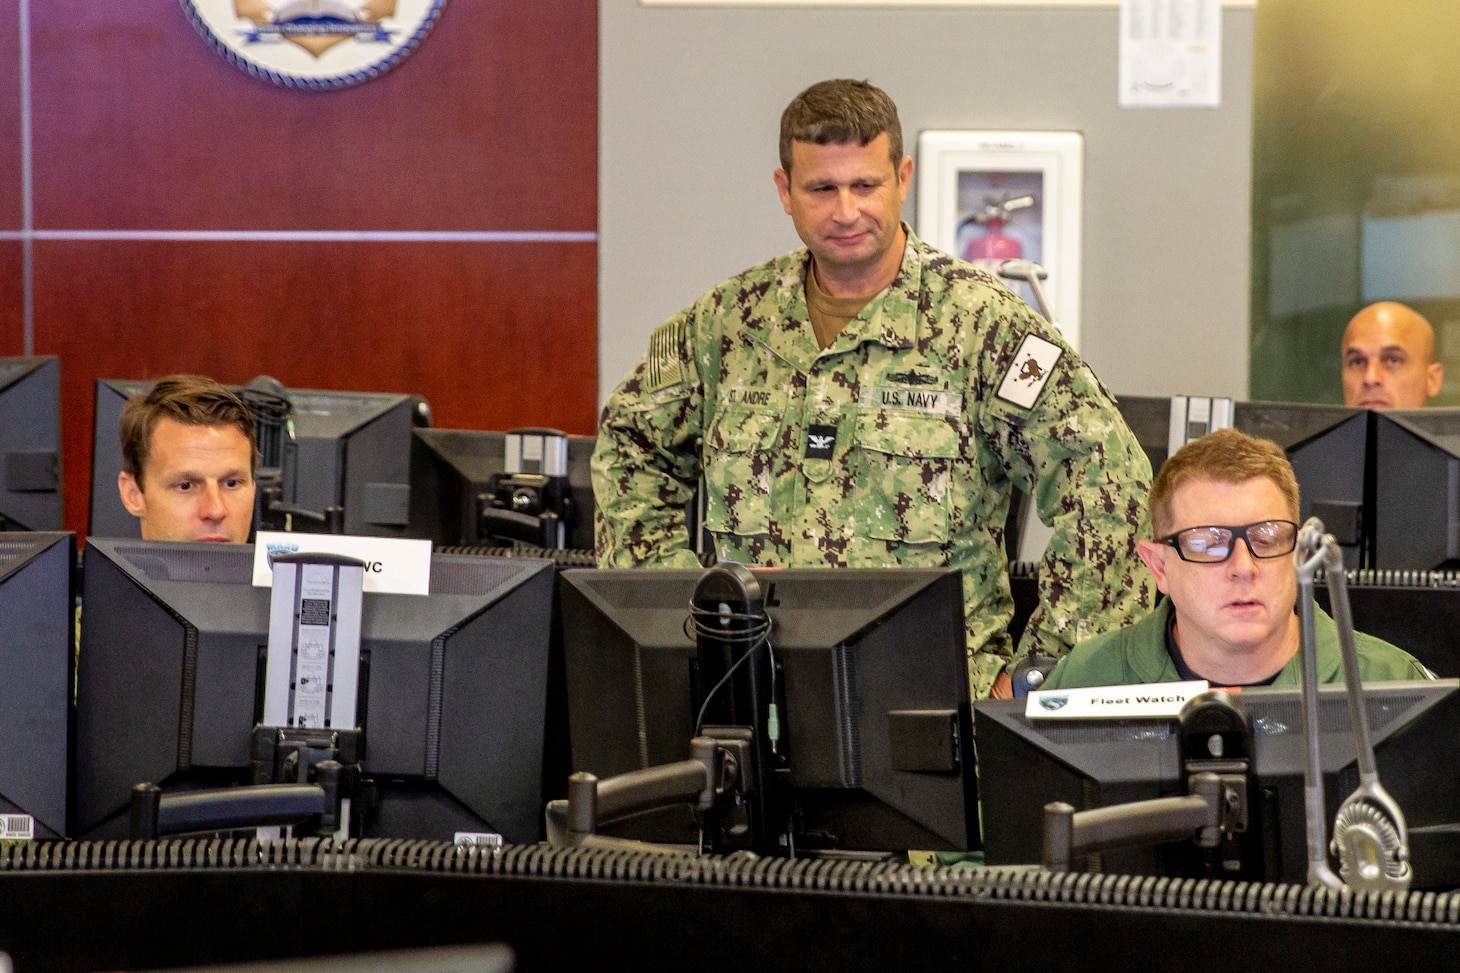 More than 60 Reserve Sailors from U.S. 5th Fleet, U.S. 3rd Fleet and U.S. Fleet Forces Command completed a four-day exercise July 16 to enhance their planning and operational capabilities.